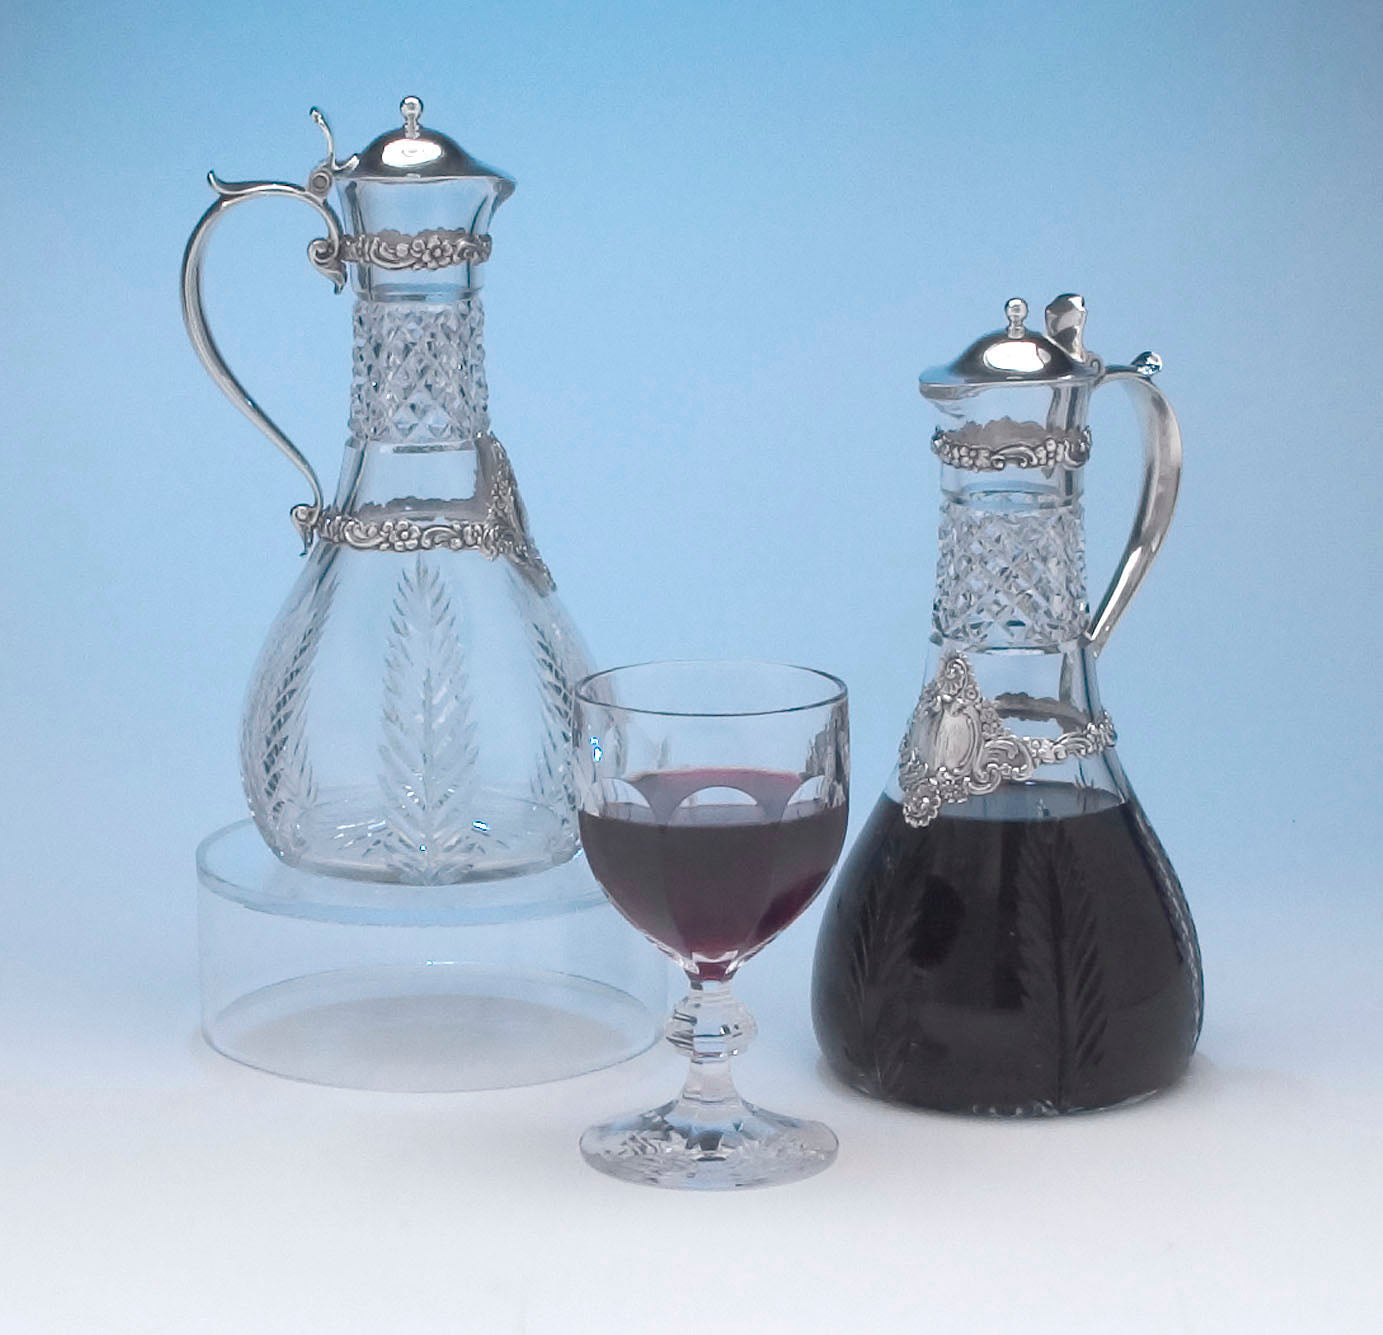 Tiffany & Co. Pair of Antique Sterling Silver Mounted Cut Glass Decanters or 'Claret Jugs', c. 1894